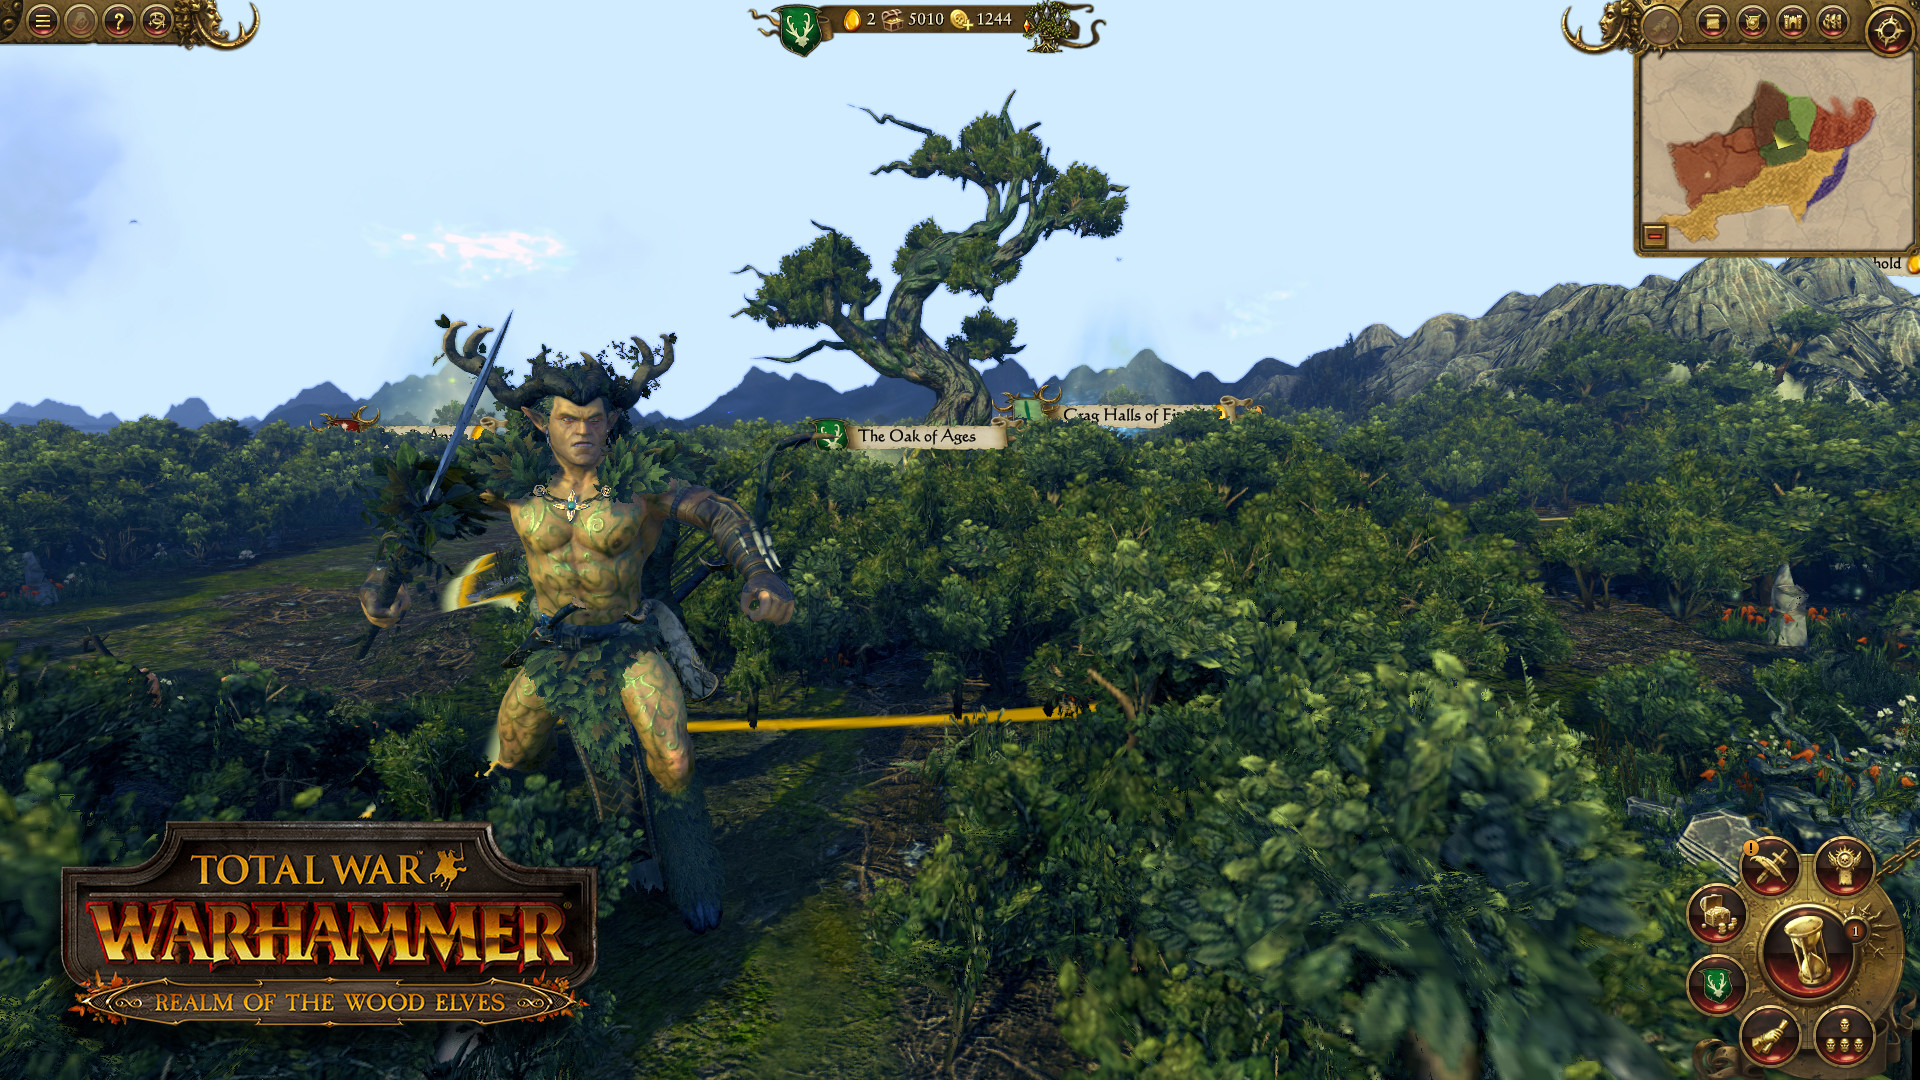 Save 50% on Total War: WARHAMMER - Realm of The Wood Elves on Steam